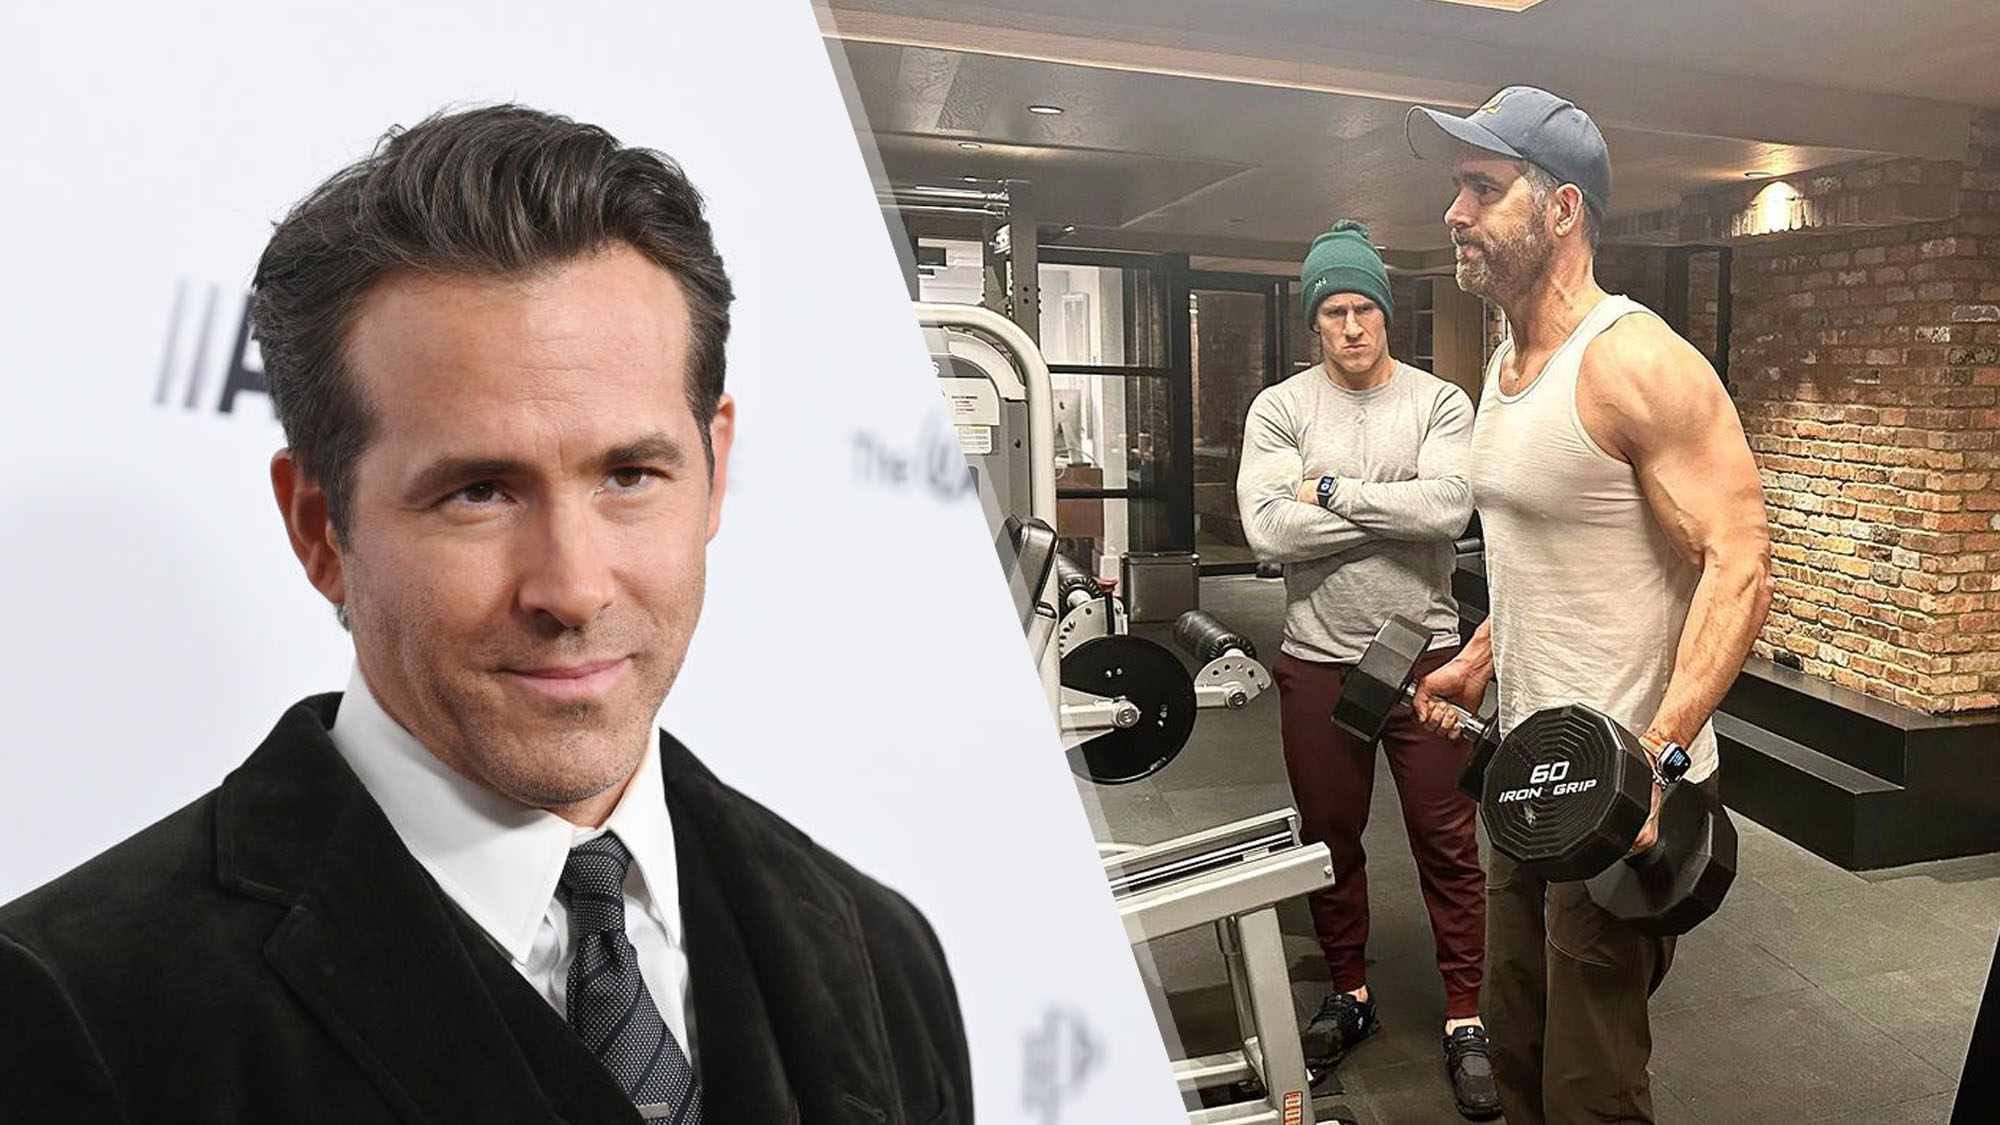 What workout does Ryan Reynolds do for his shoulders? - Quora